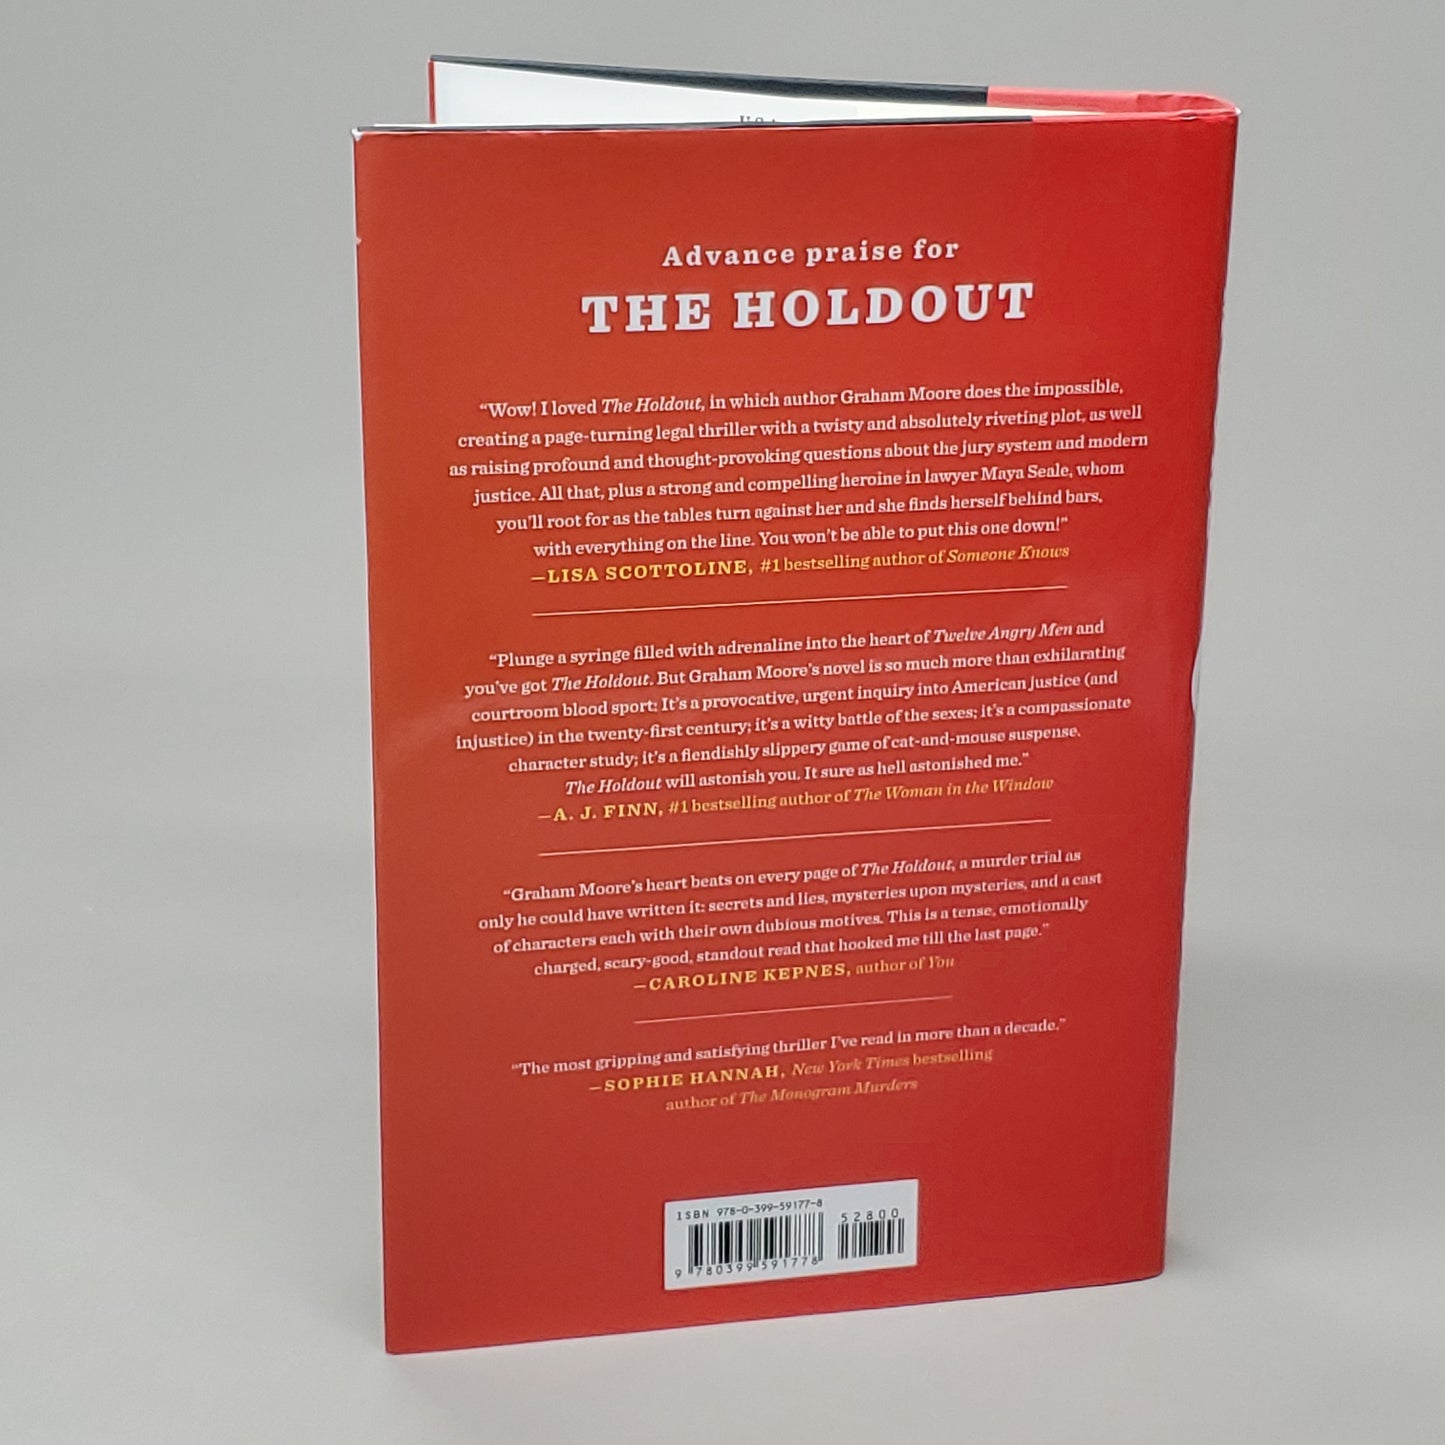 THE HOLDOUT by Graham Moore Book Hardback (New)